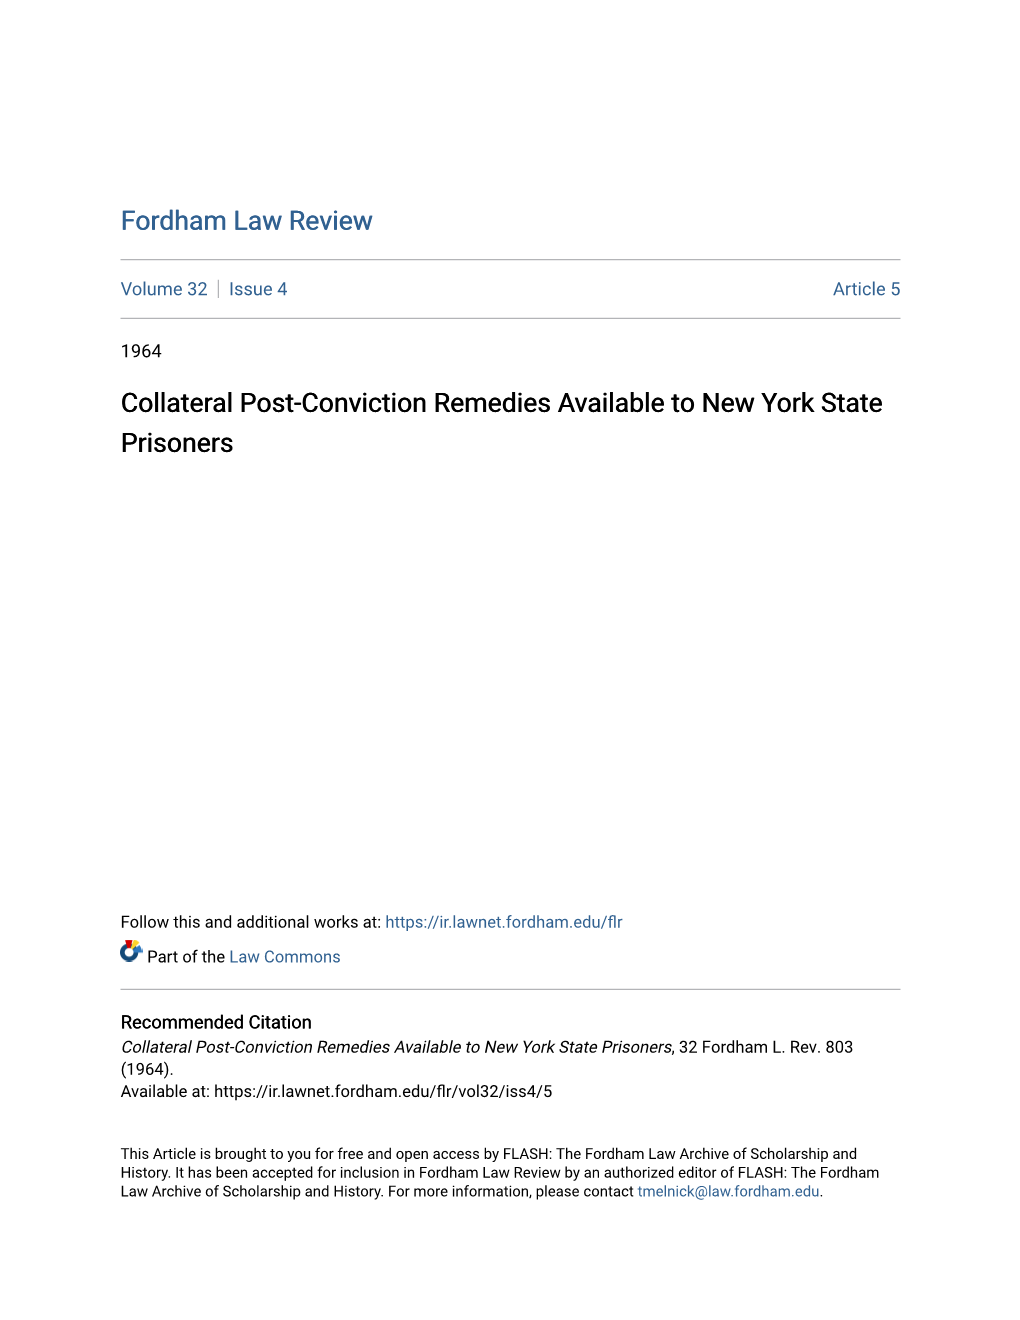 Collateral Post-Conviction Remedies Available to New York State Prisoners